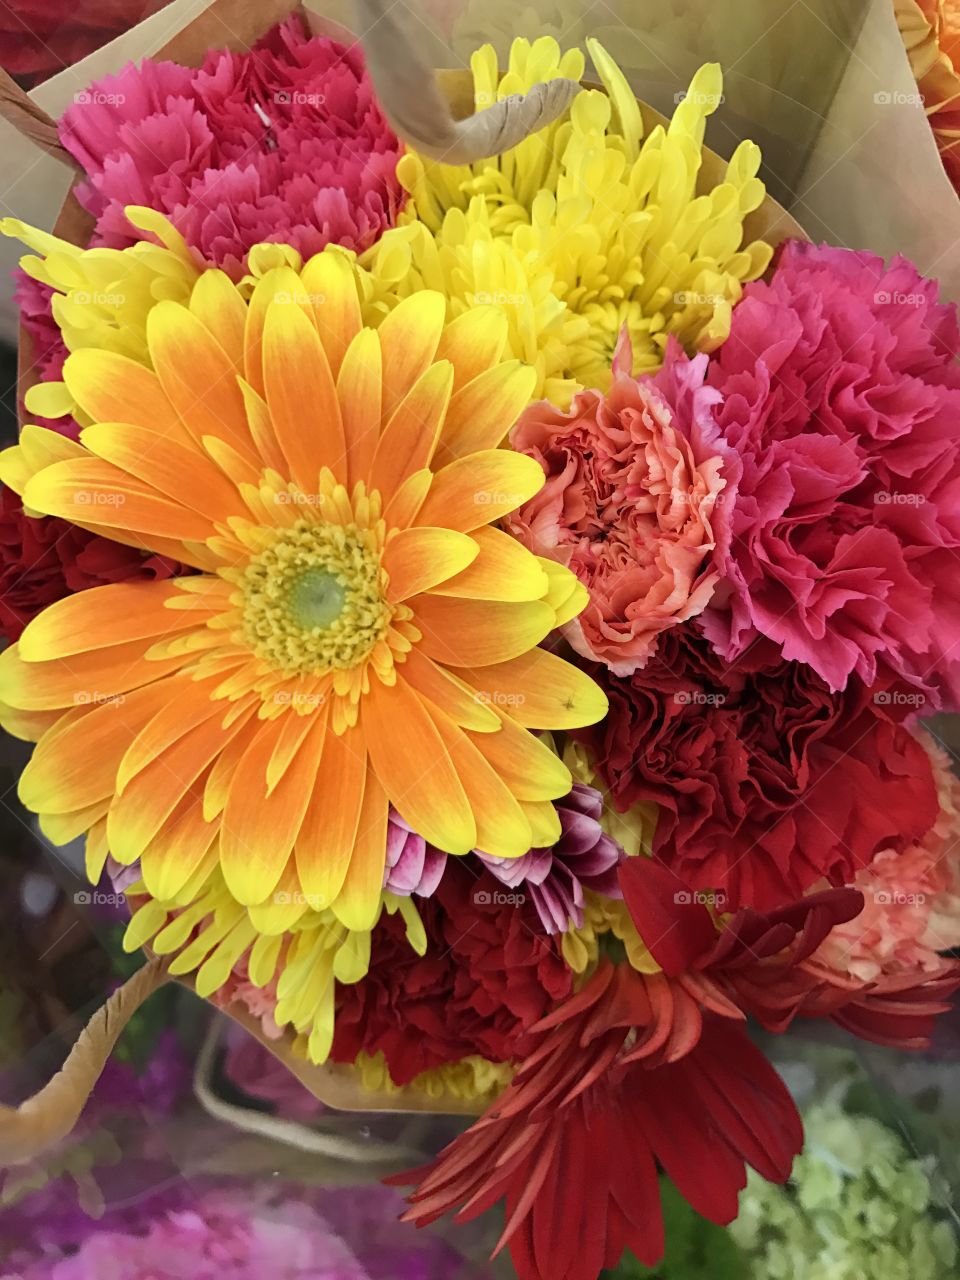 Flowers at the super market 